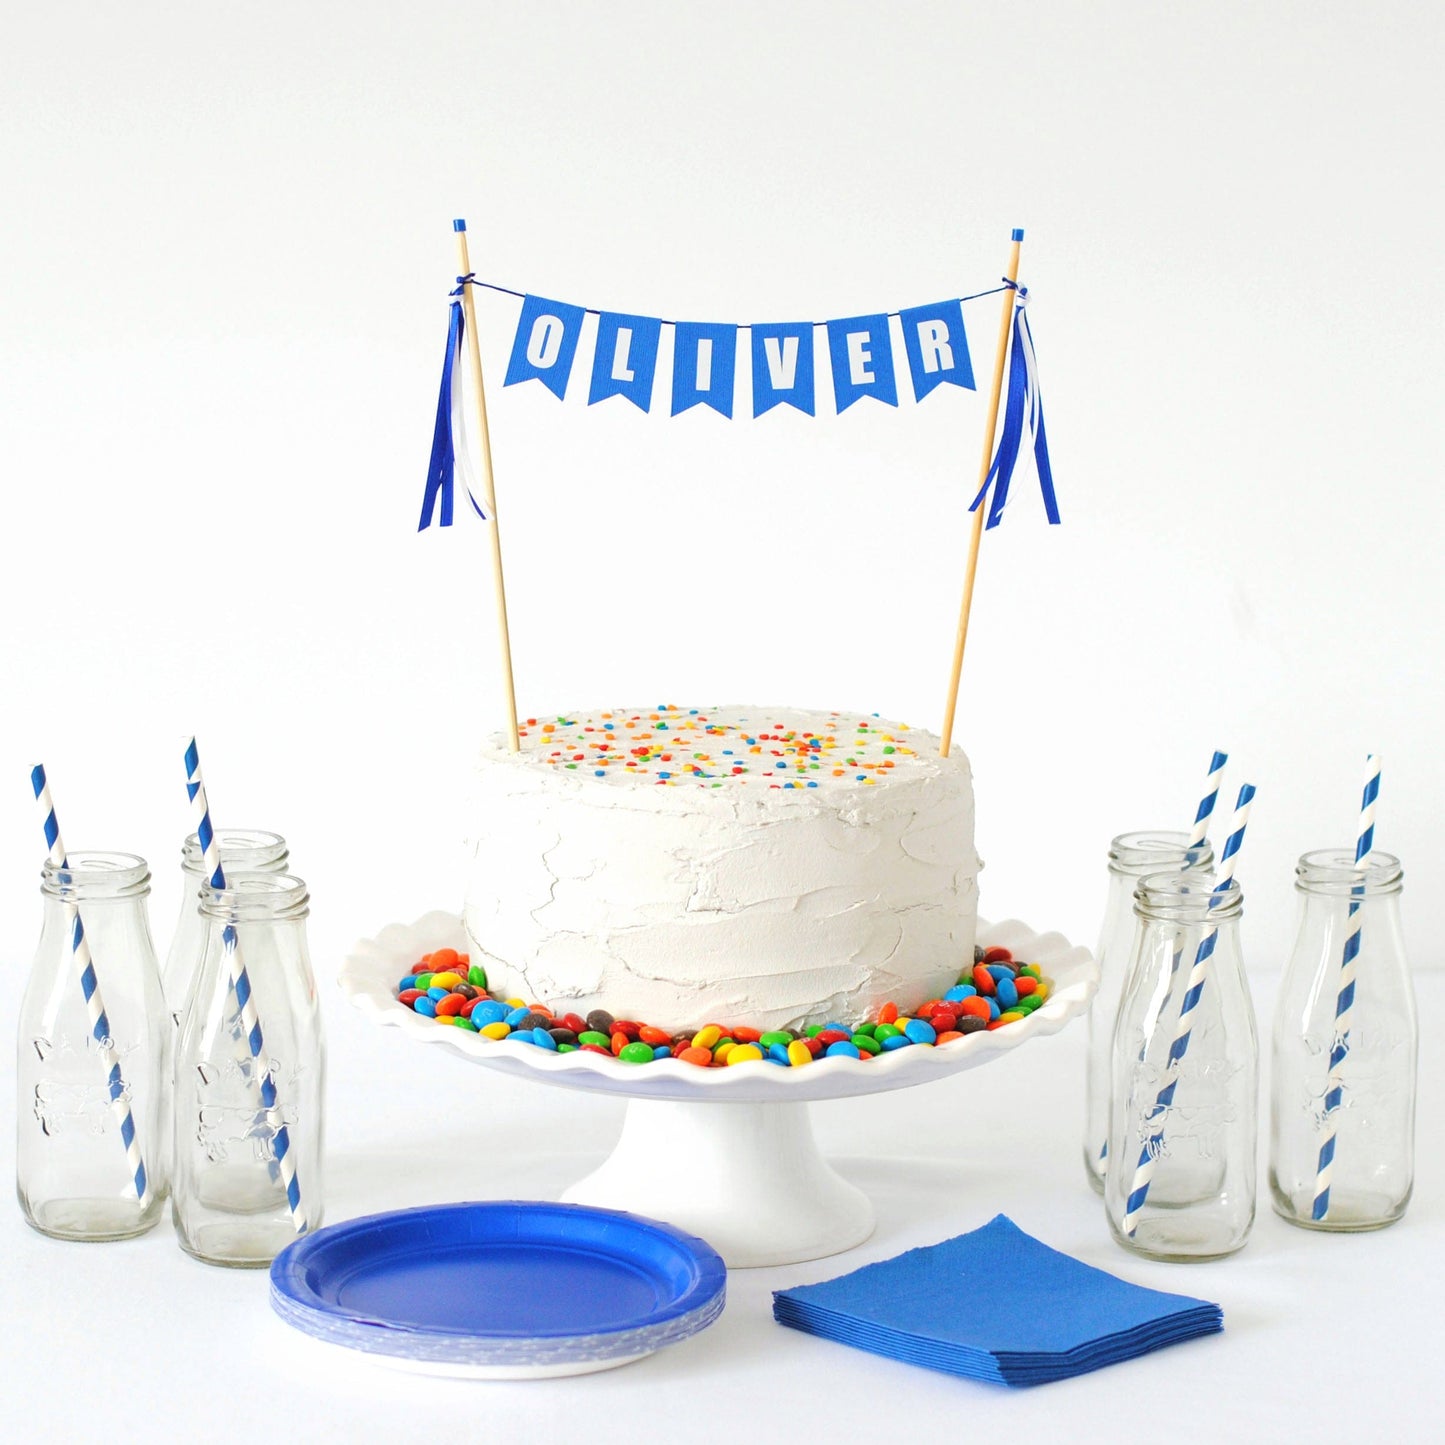 
                  
                    royal blue and white personalized name cake topper on white cake with sprinkles
                  
                